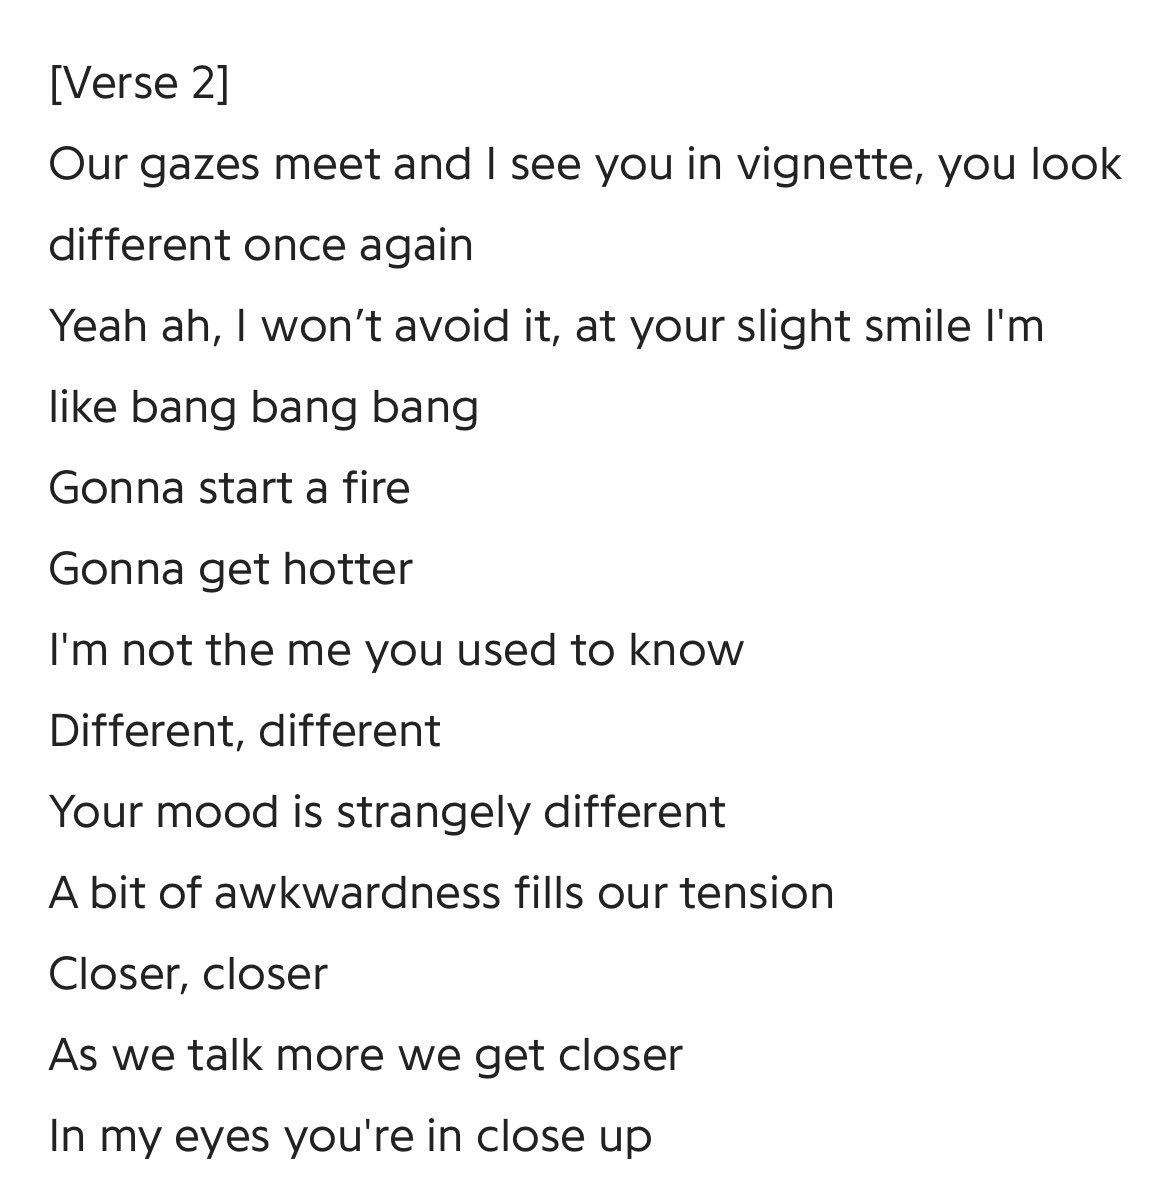 bonus 1. felix helped write the lyrics for wow by danceracha, the lyrics of this song does not include any gender terms, they just use second person pronouns "you"